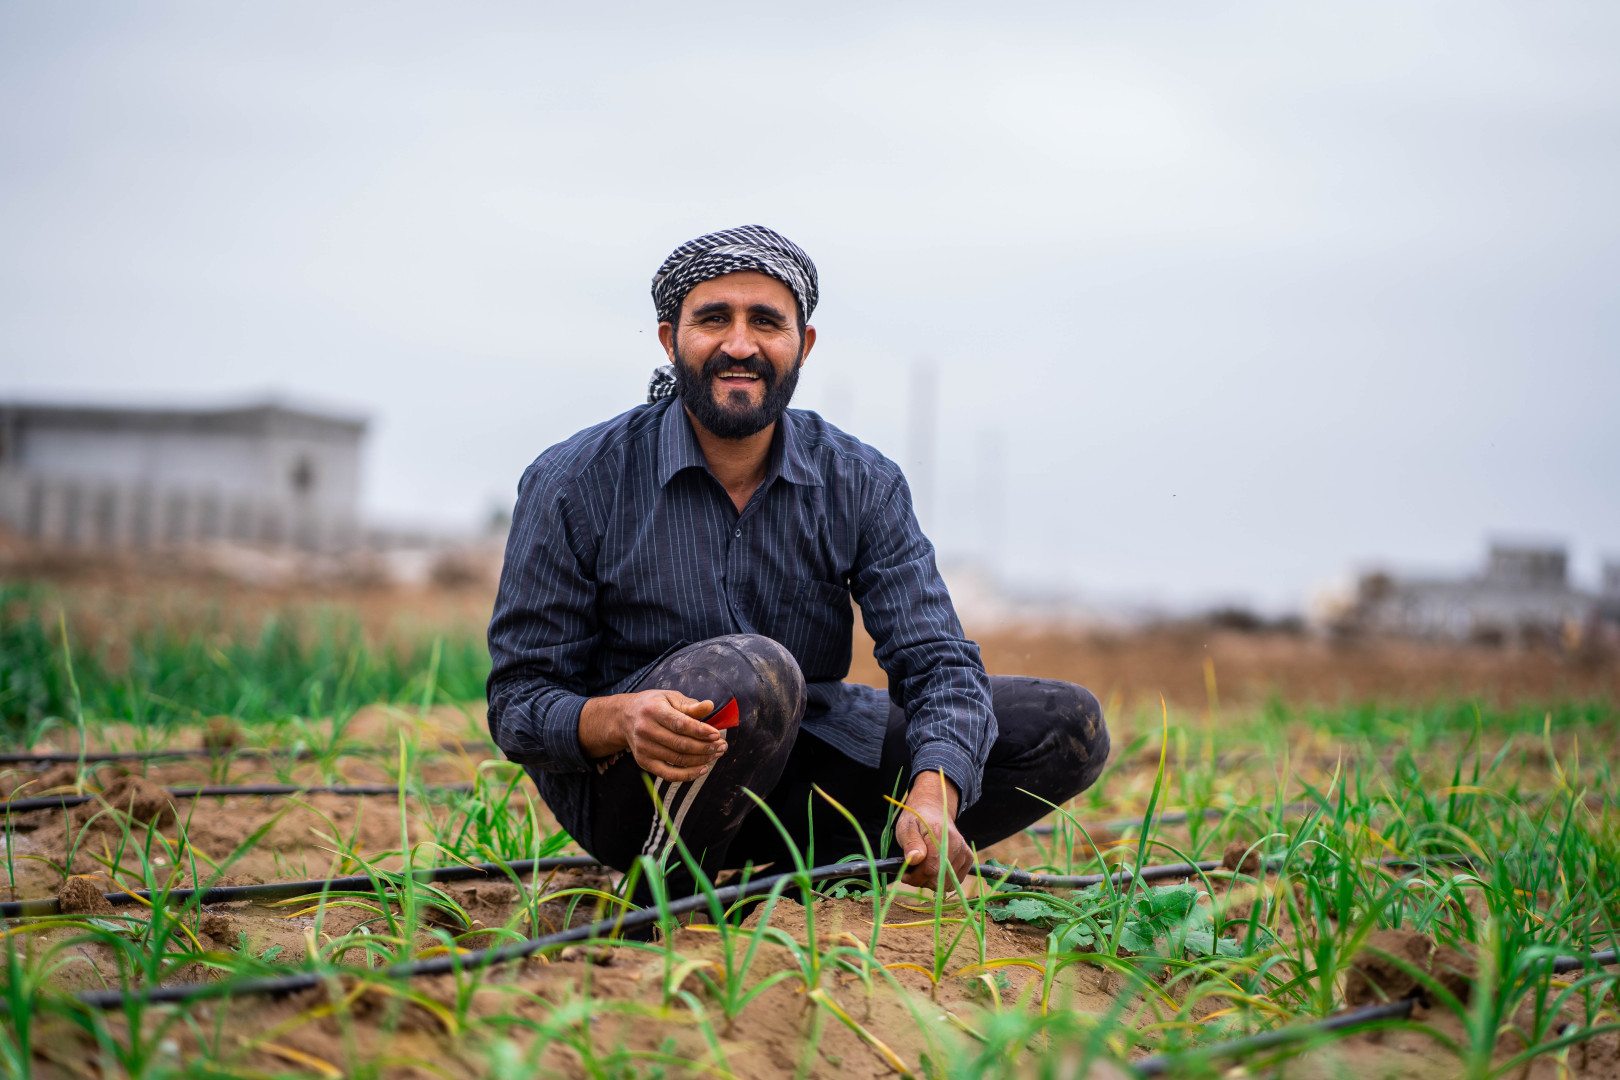 Iraqi farmers embrace hydroponics to enhance agricultural sustainability